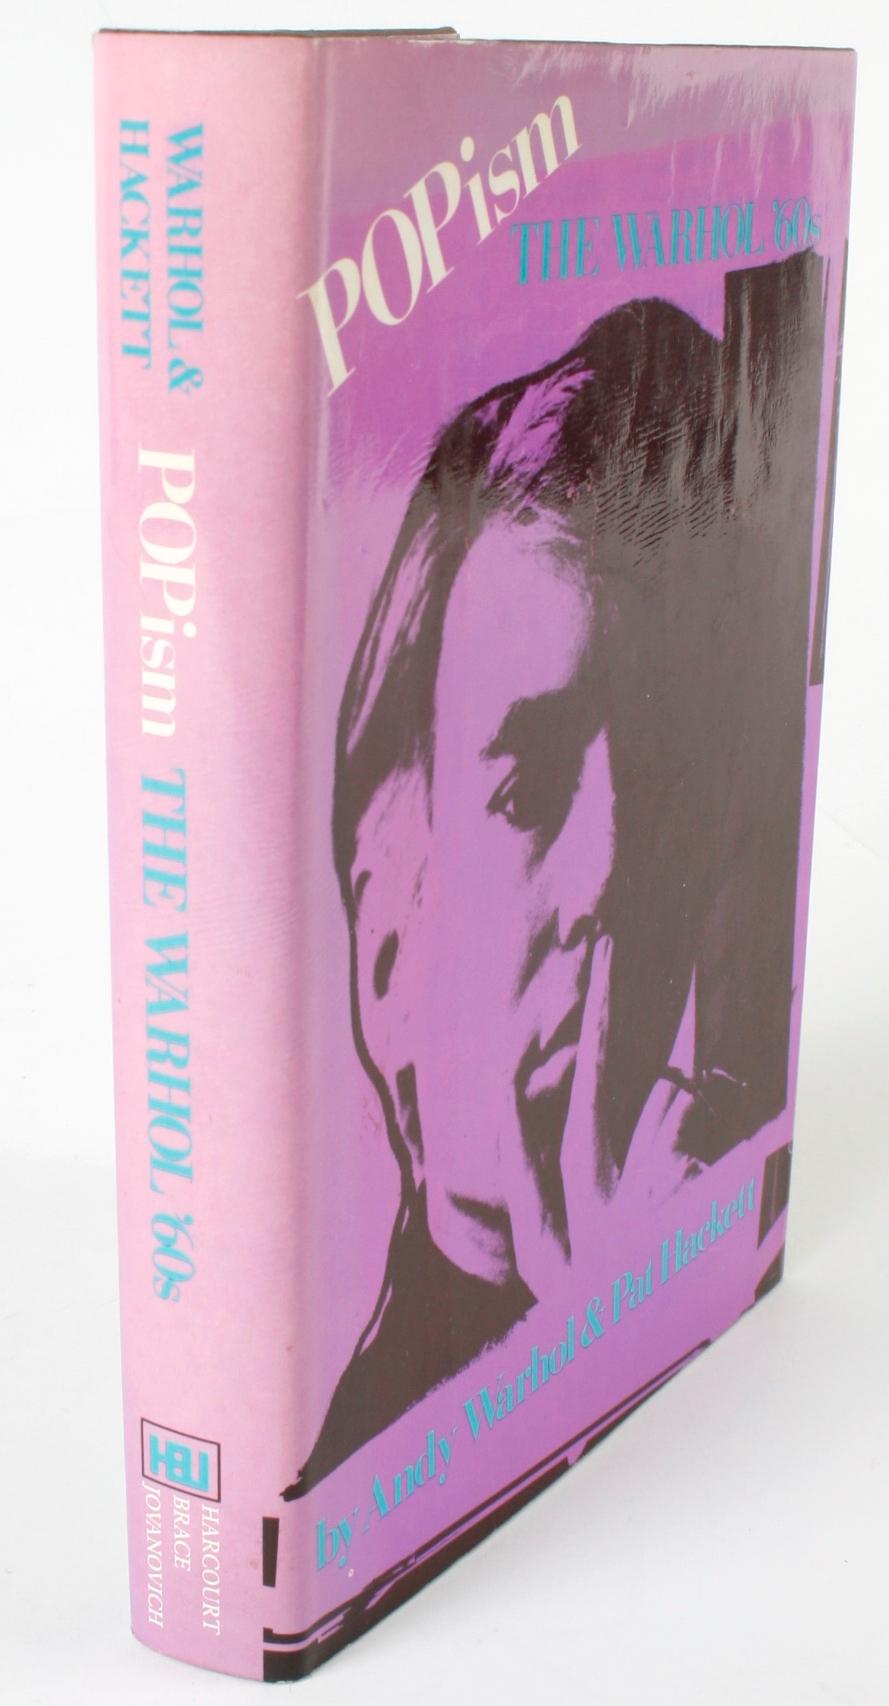 Popism: The Warhol '60s by Andy Warhol 12